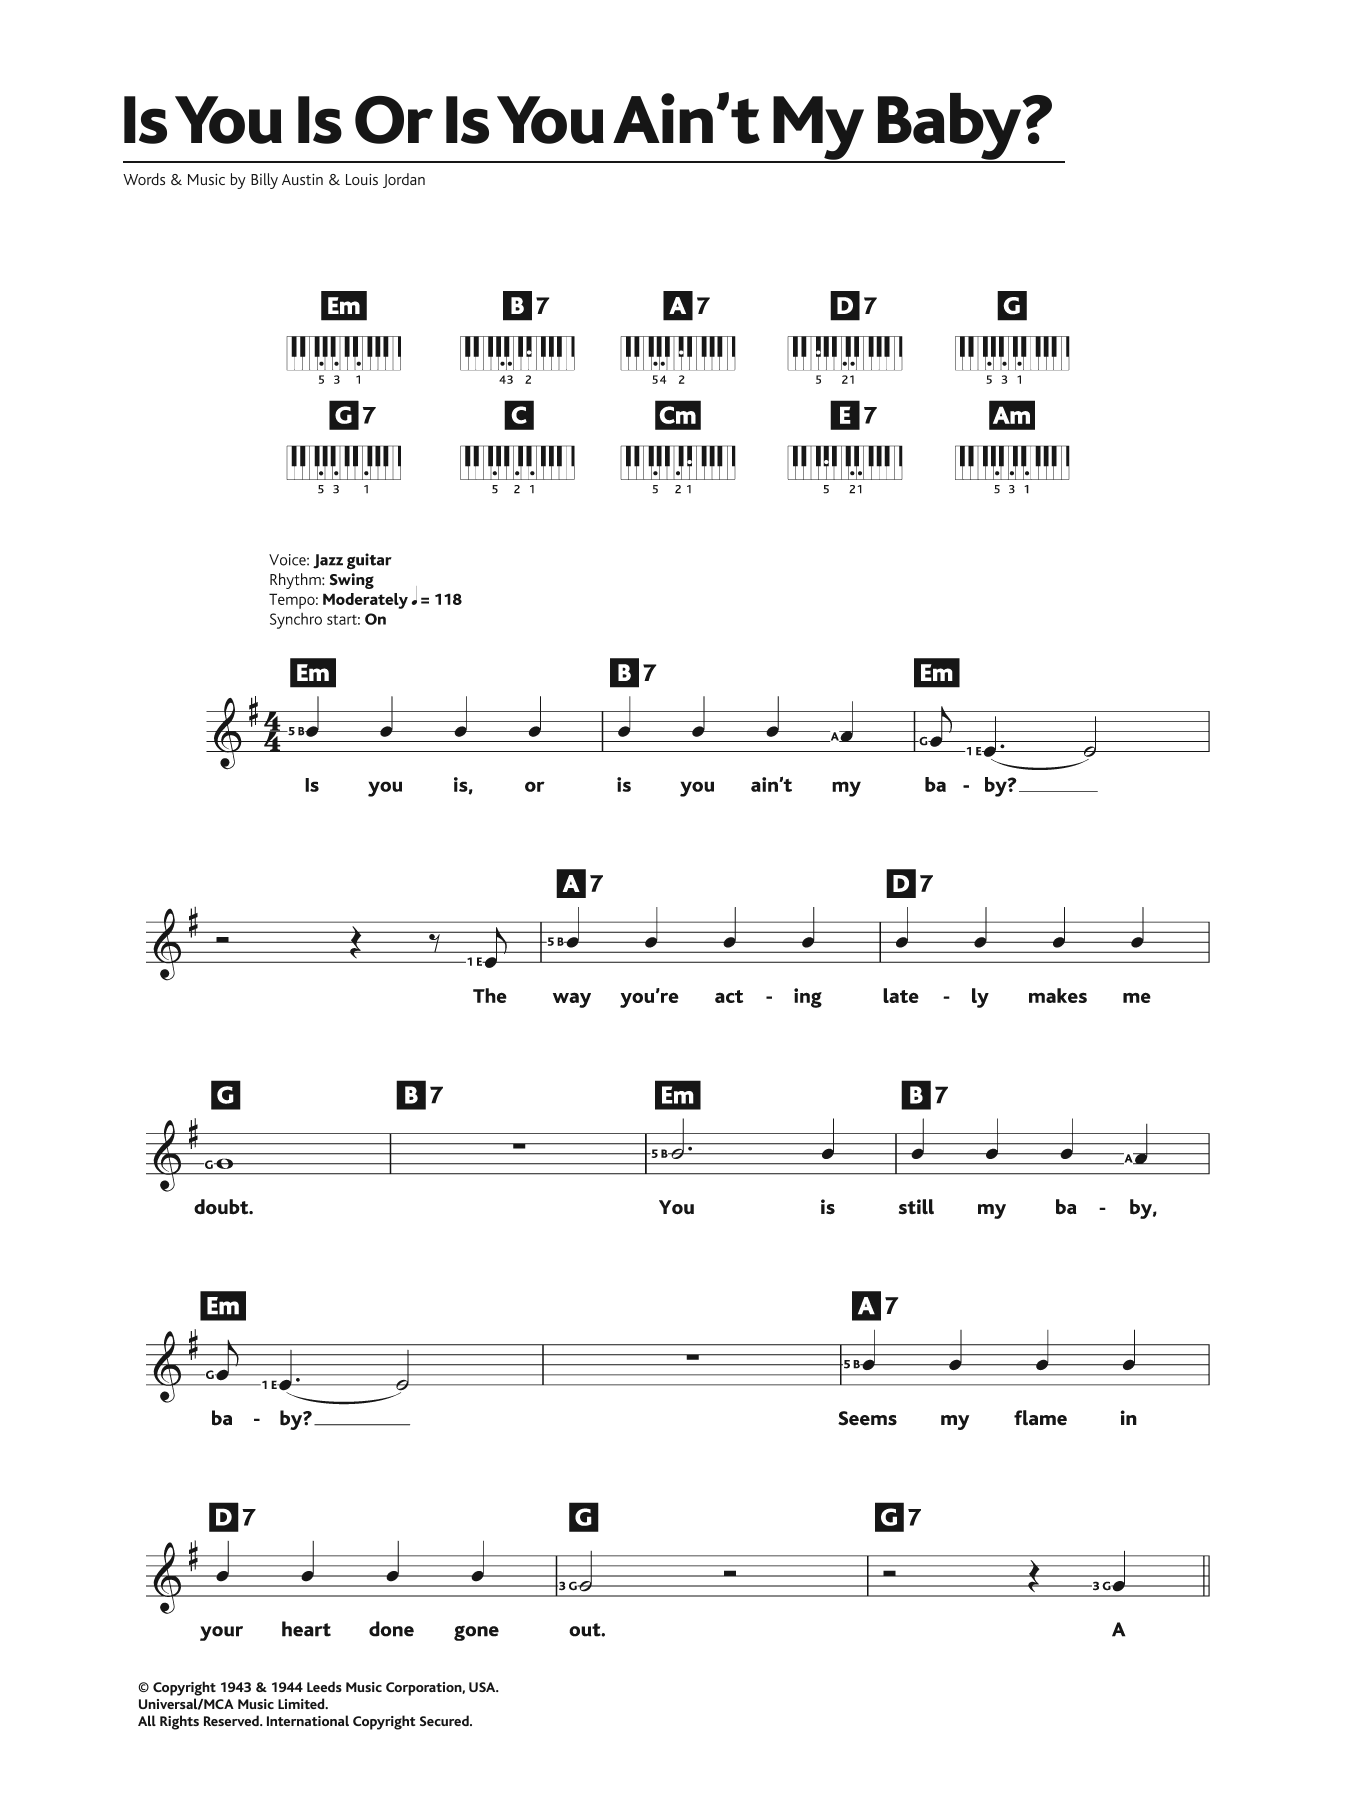 Download Diana Krall Is You Is Or Is You Ain't My Baby? Sheet Music